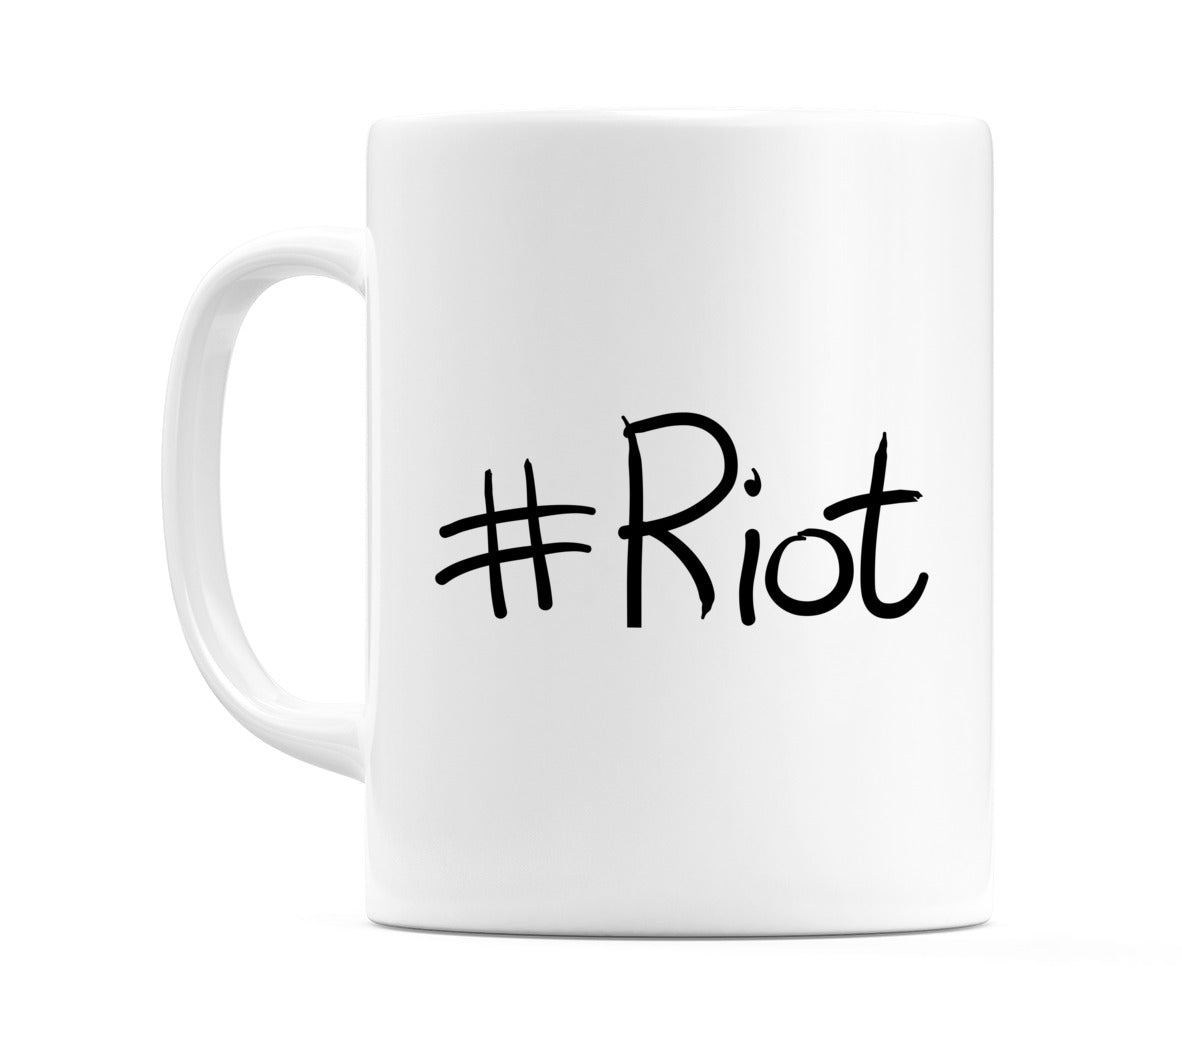 Mug with #Riot written on it.